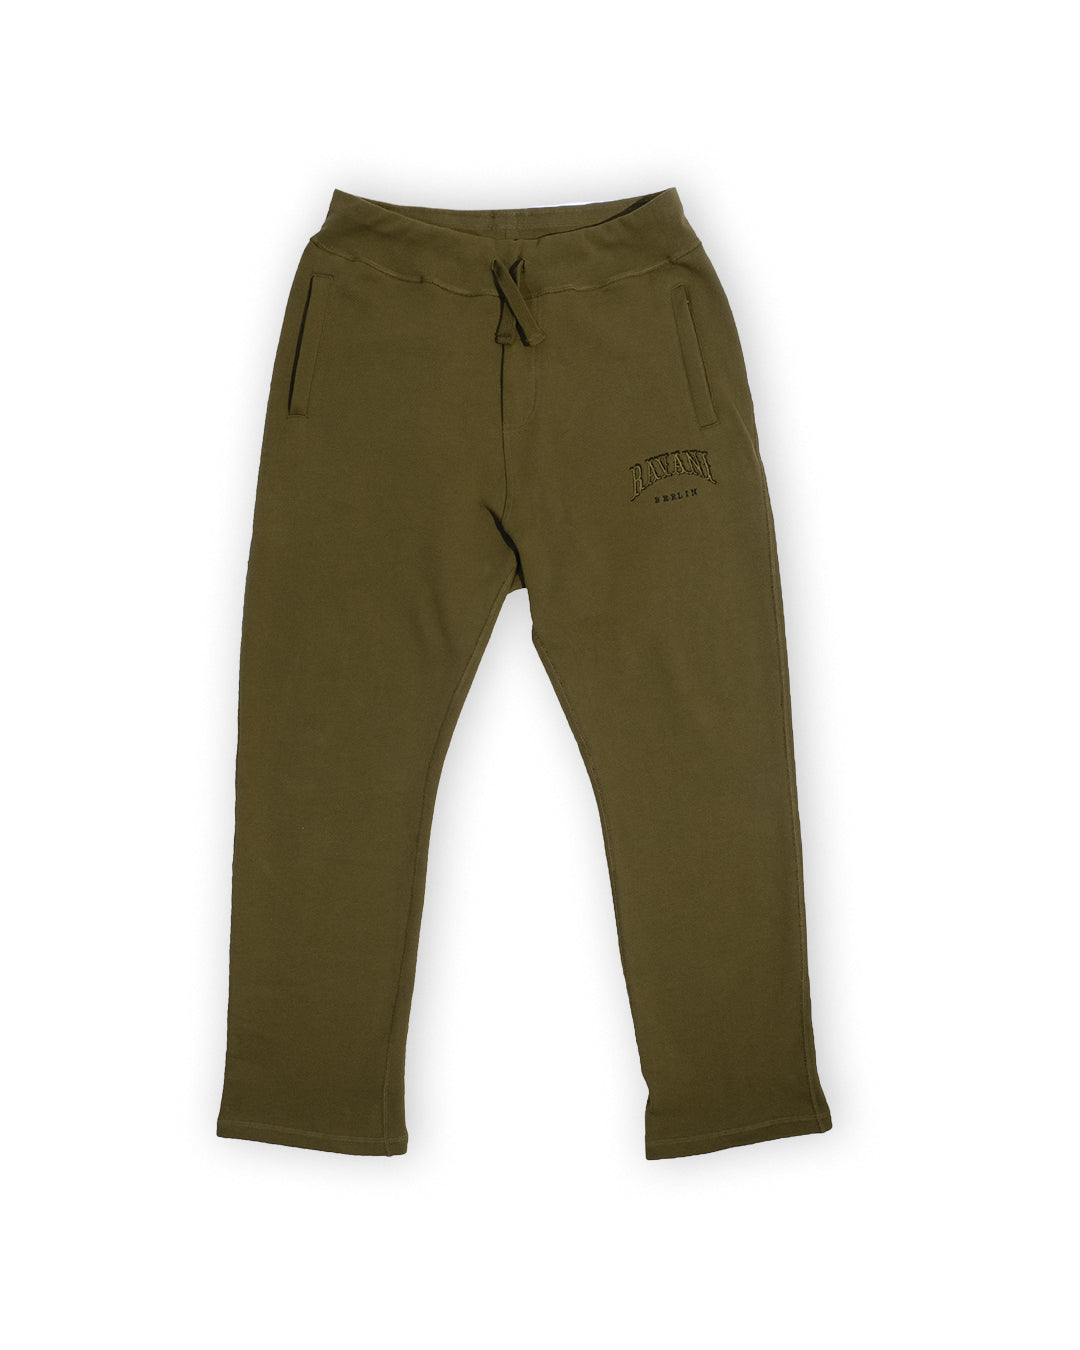 OLIVE ARMY Trackpants